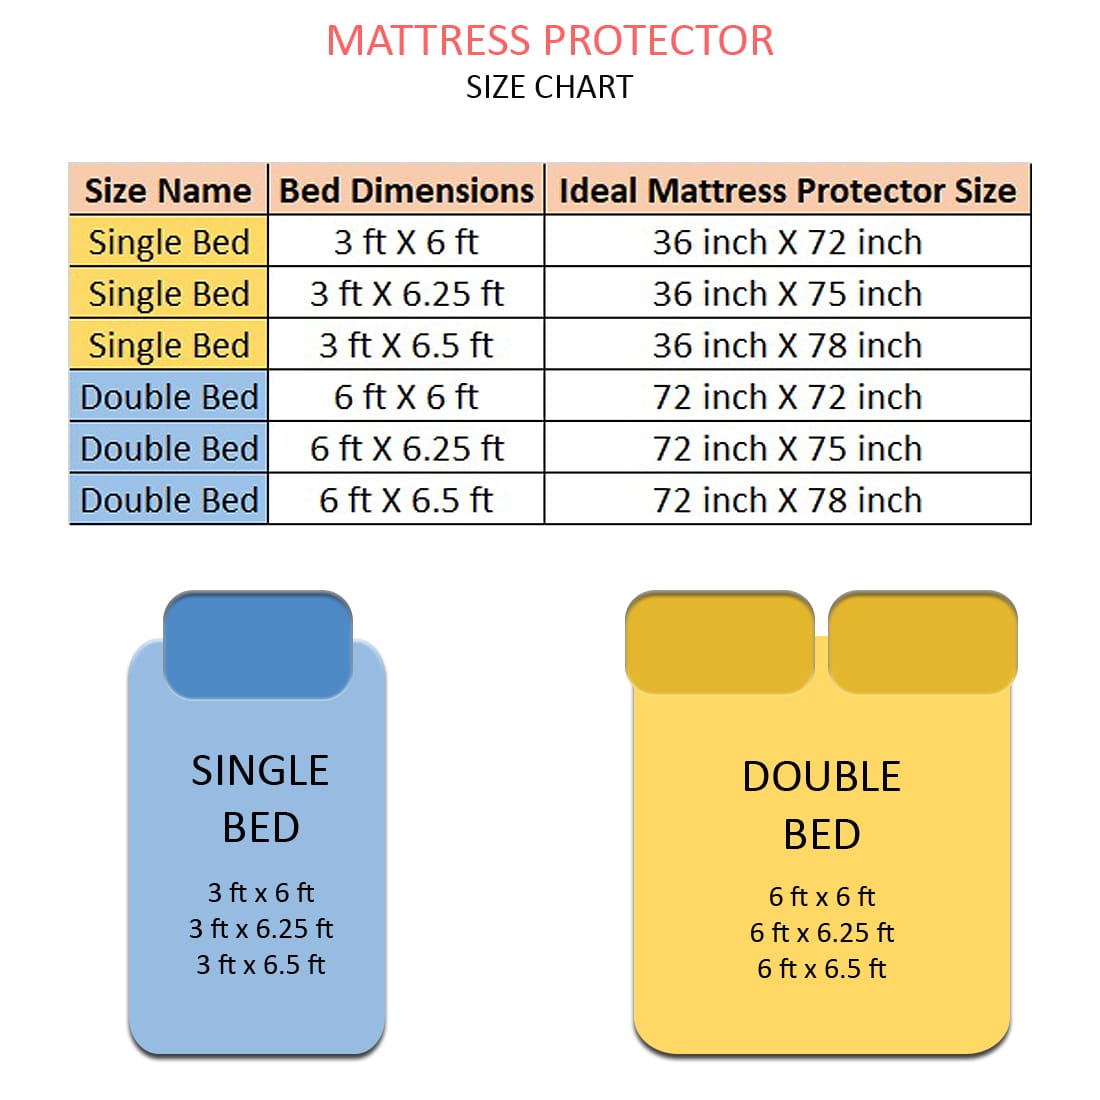 AURAVE Elasticated Quilted Waterproof Mattress Protector (Gold)